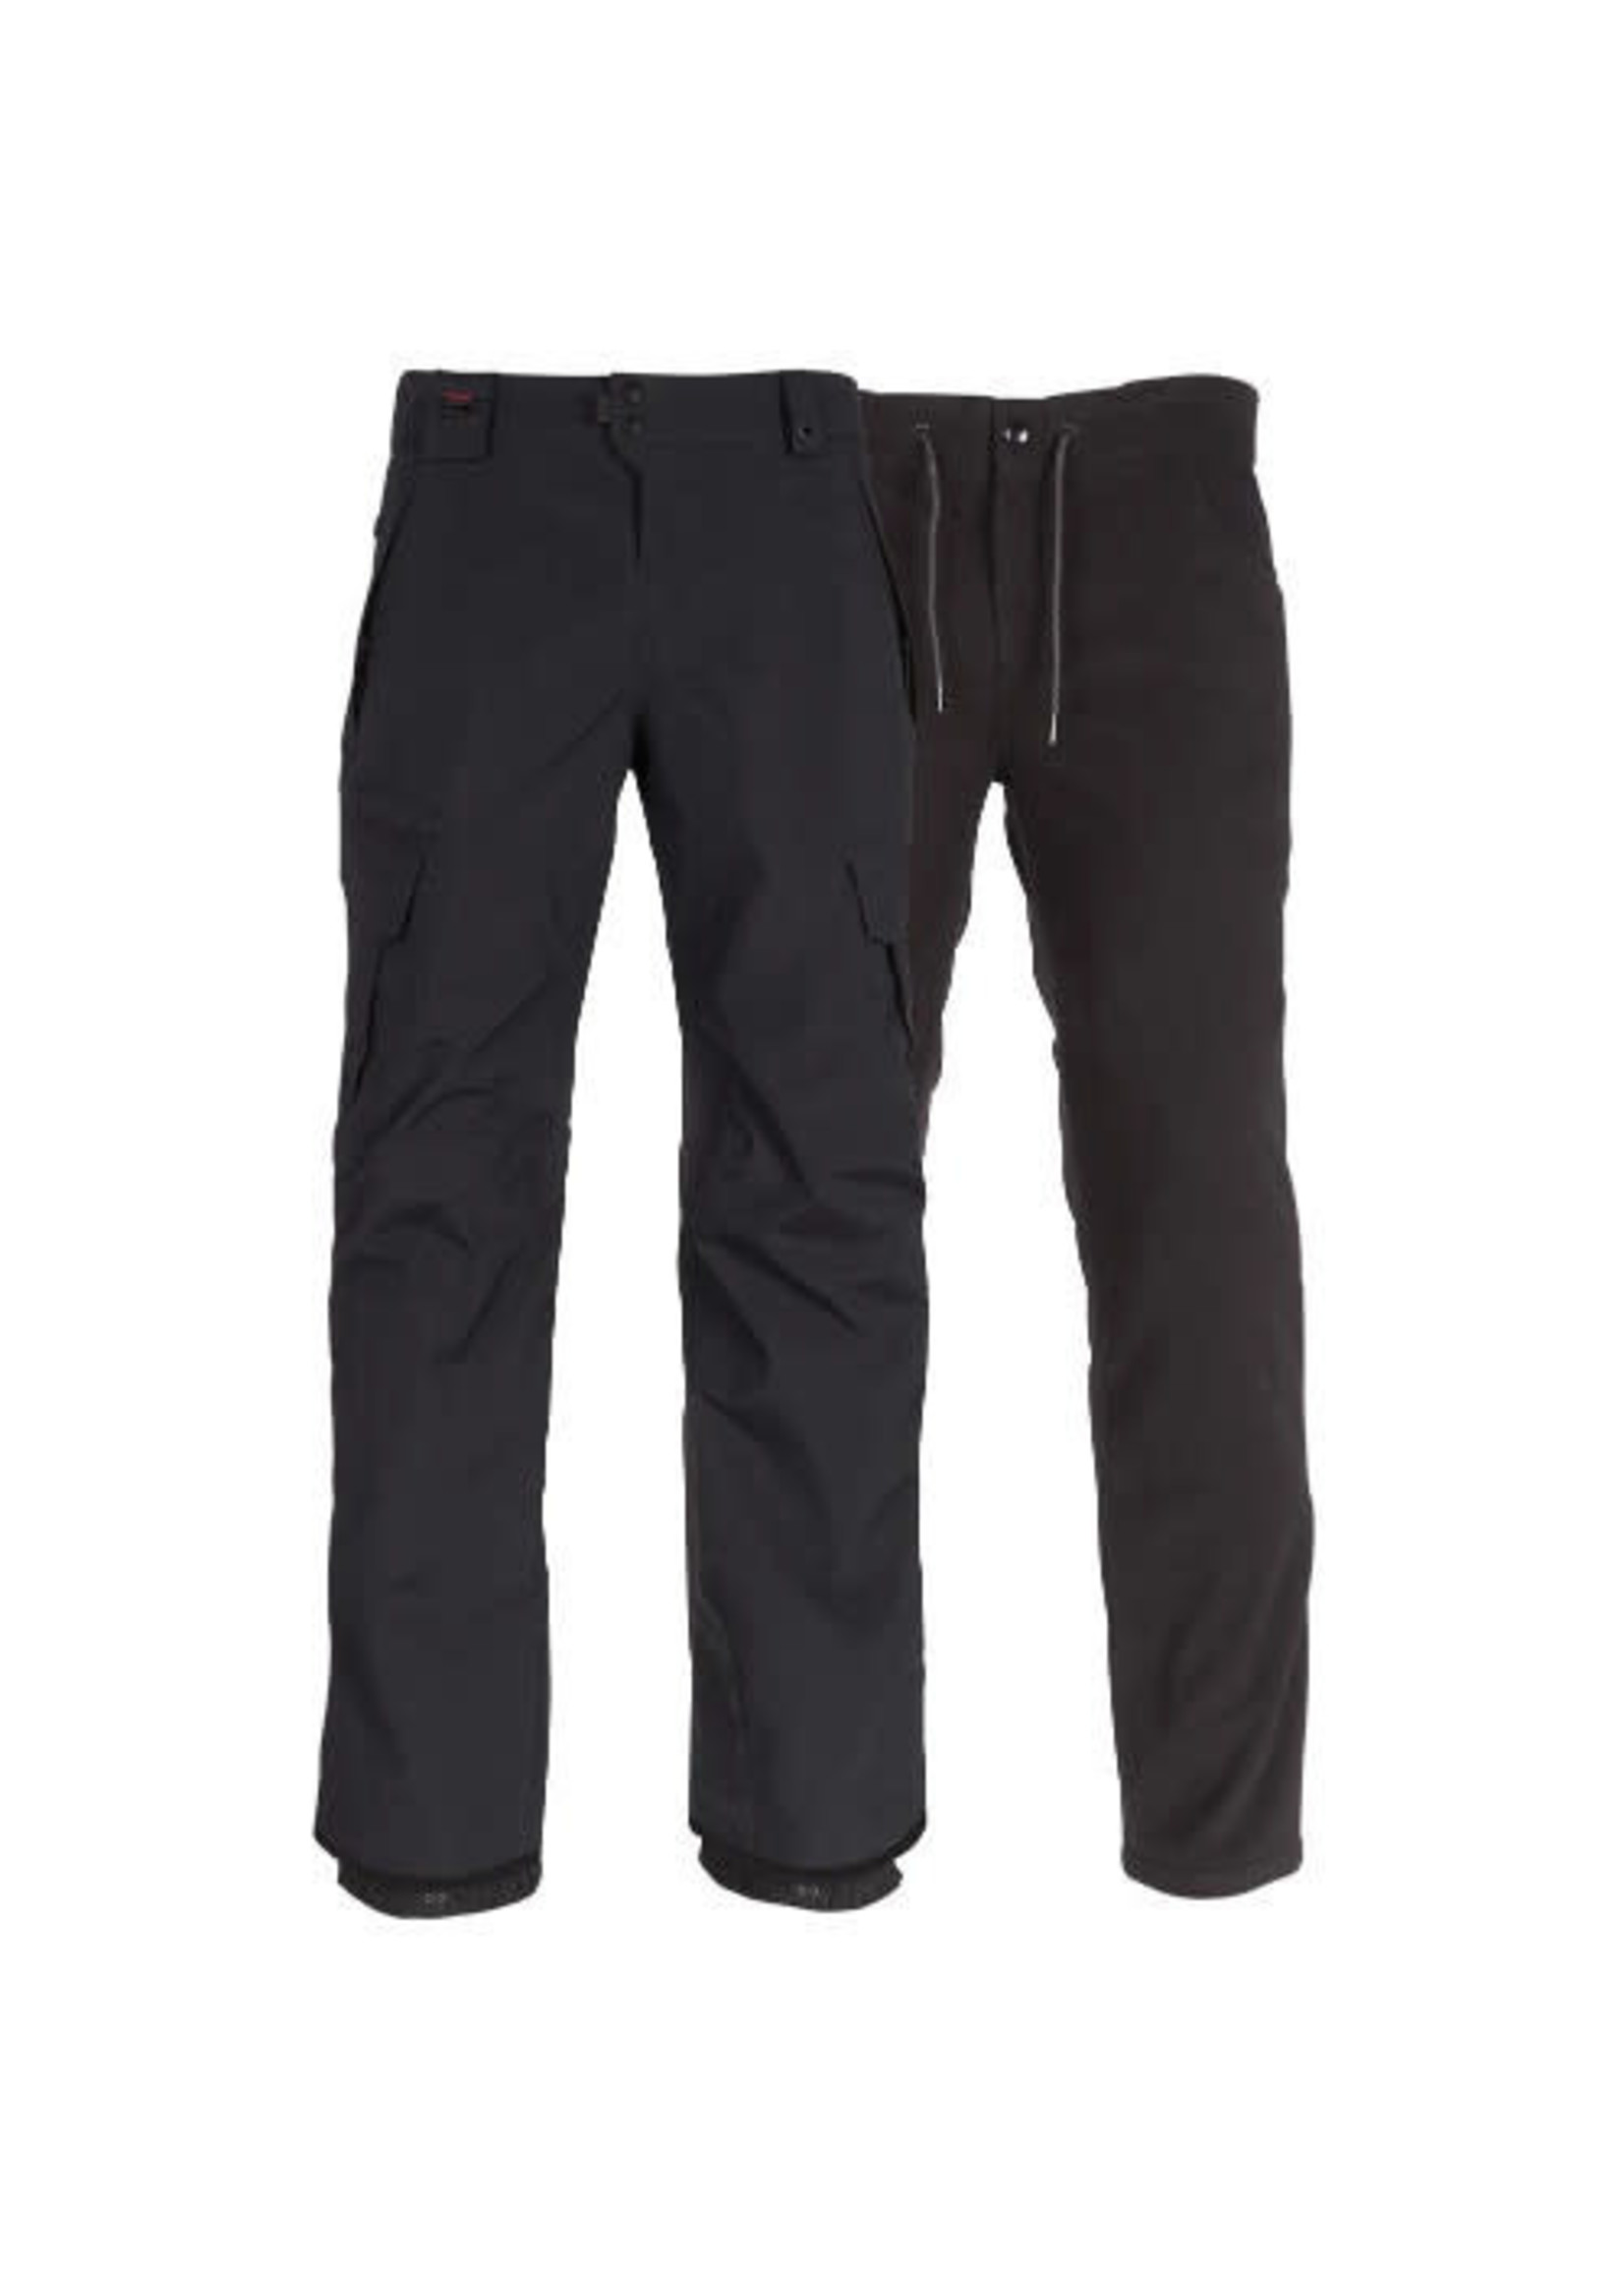 686 686 Smarty 3-in-1 Cargo Pant 2020